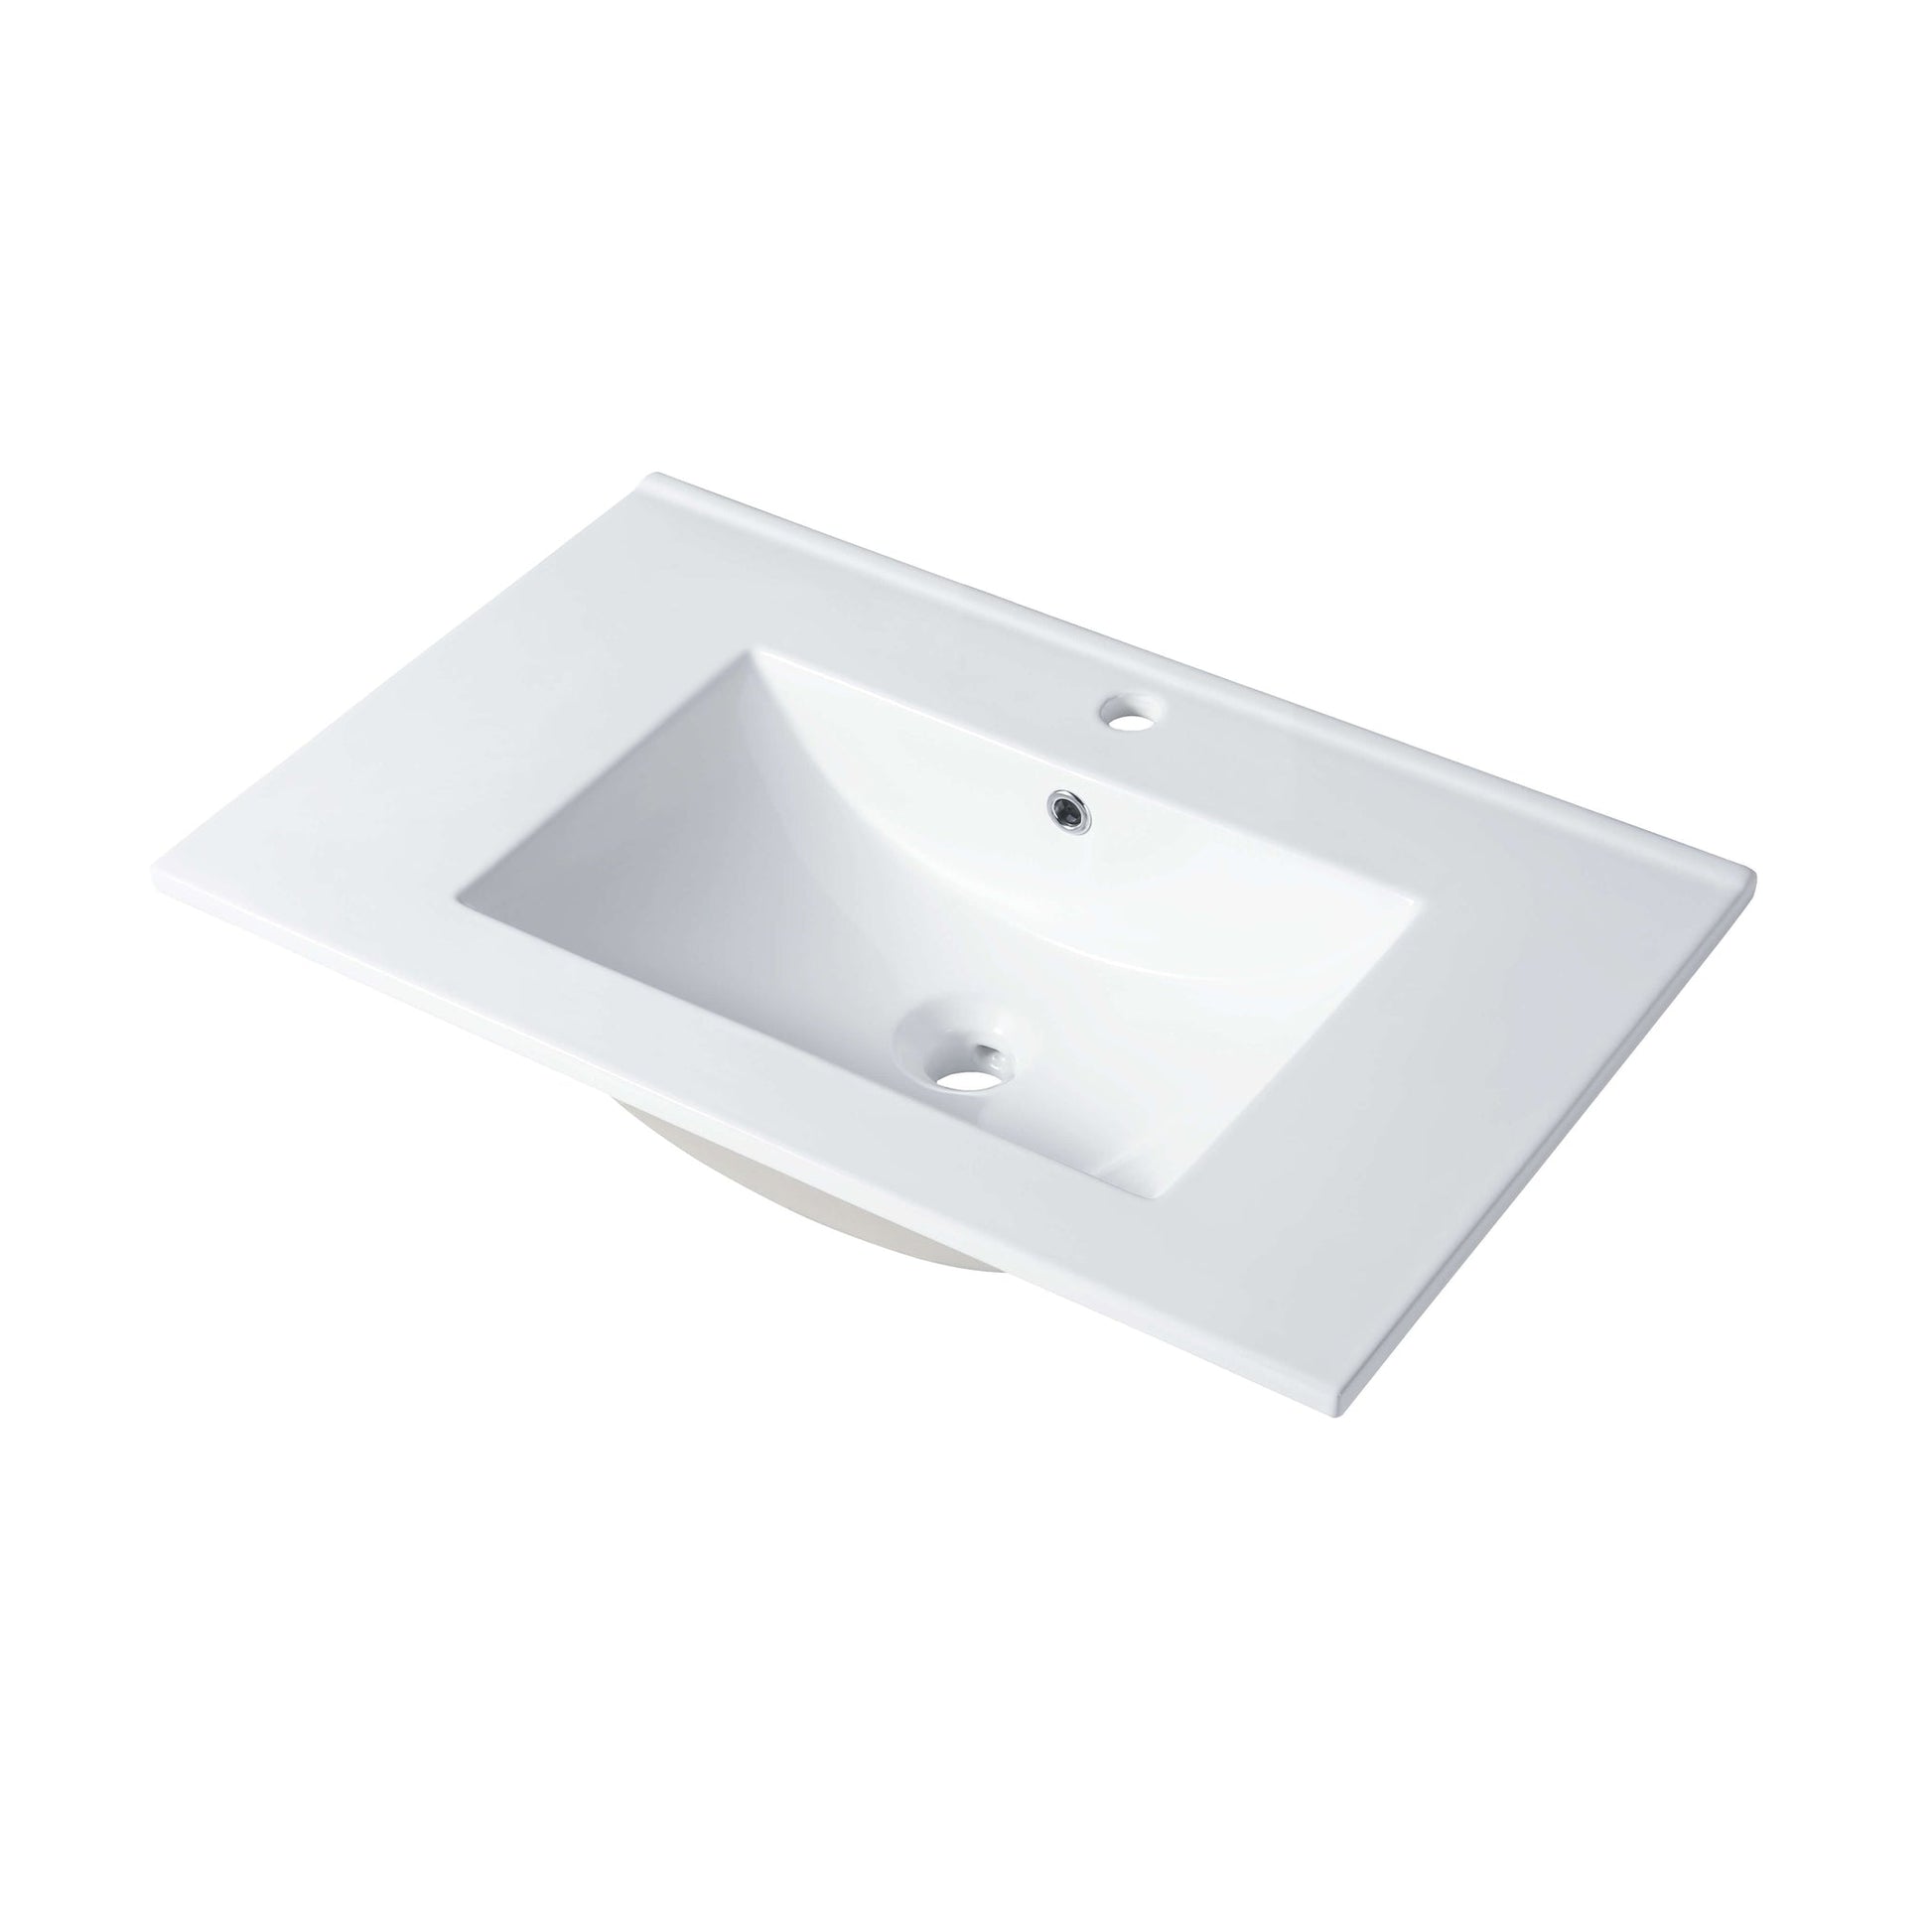 Blossom Sydney 30" x 18" White Rectangular Ceramic Vanity Top With Integrated Single Sink and Overflow